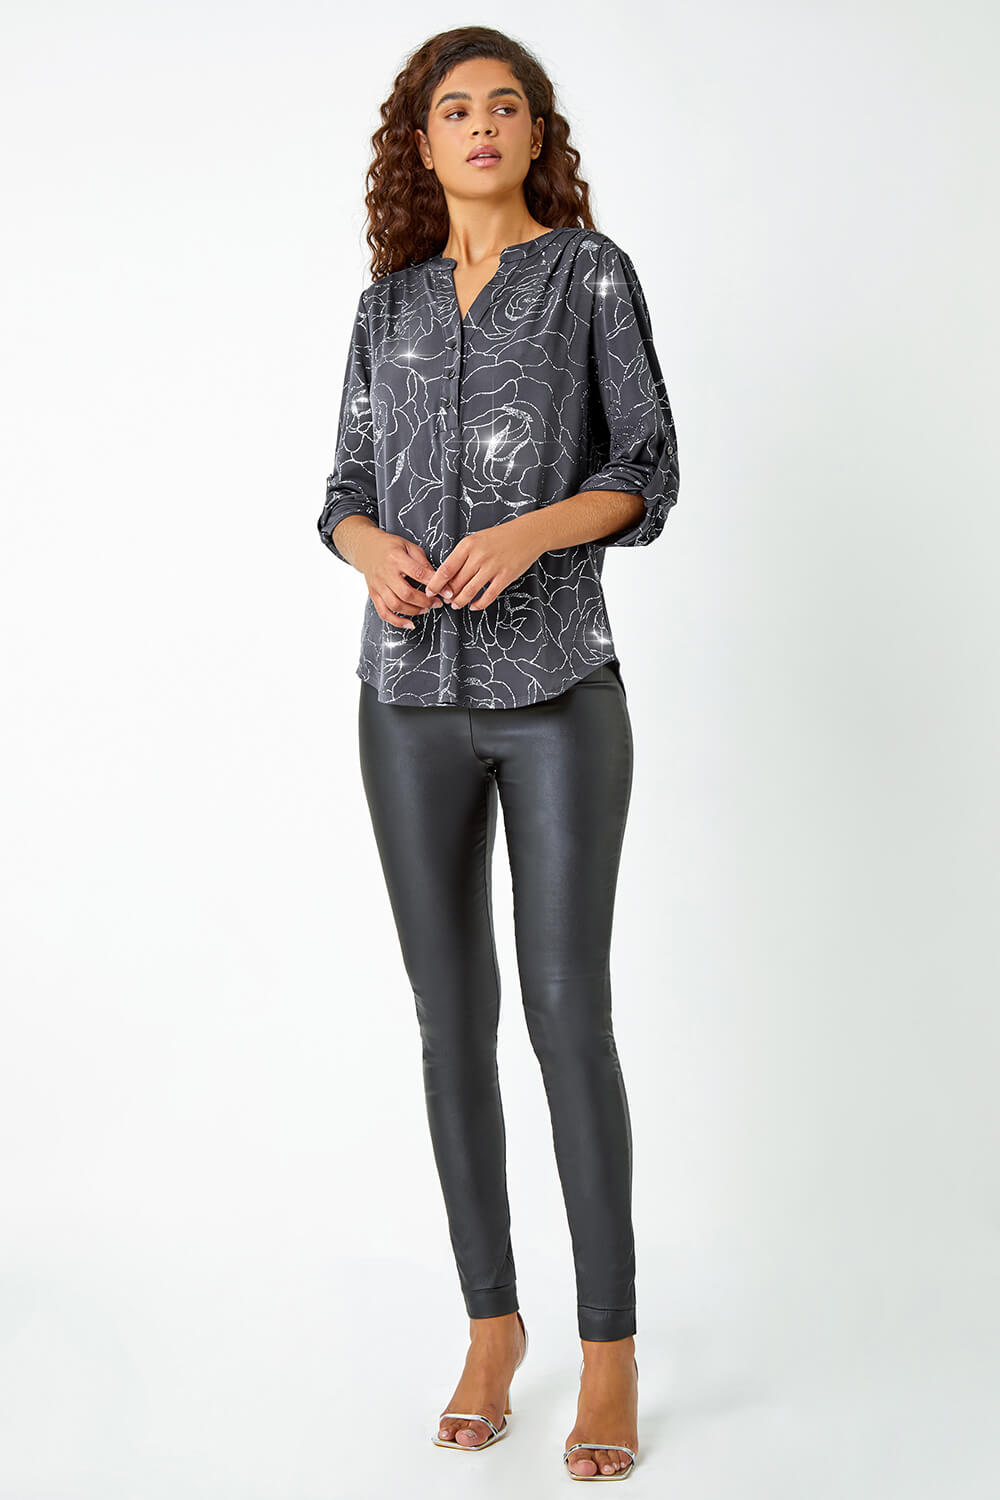 Grey Metallic Linear Floral Stretch Shirt, Image 2 of 5